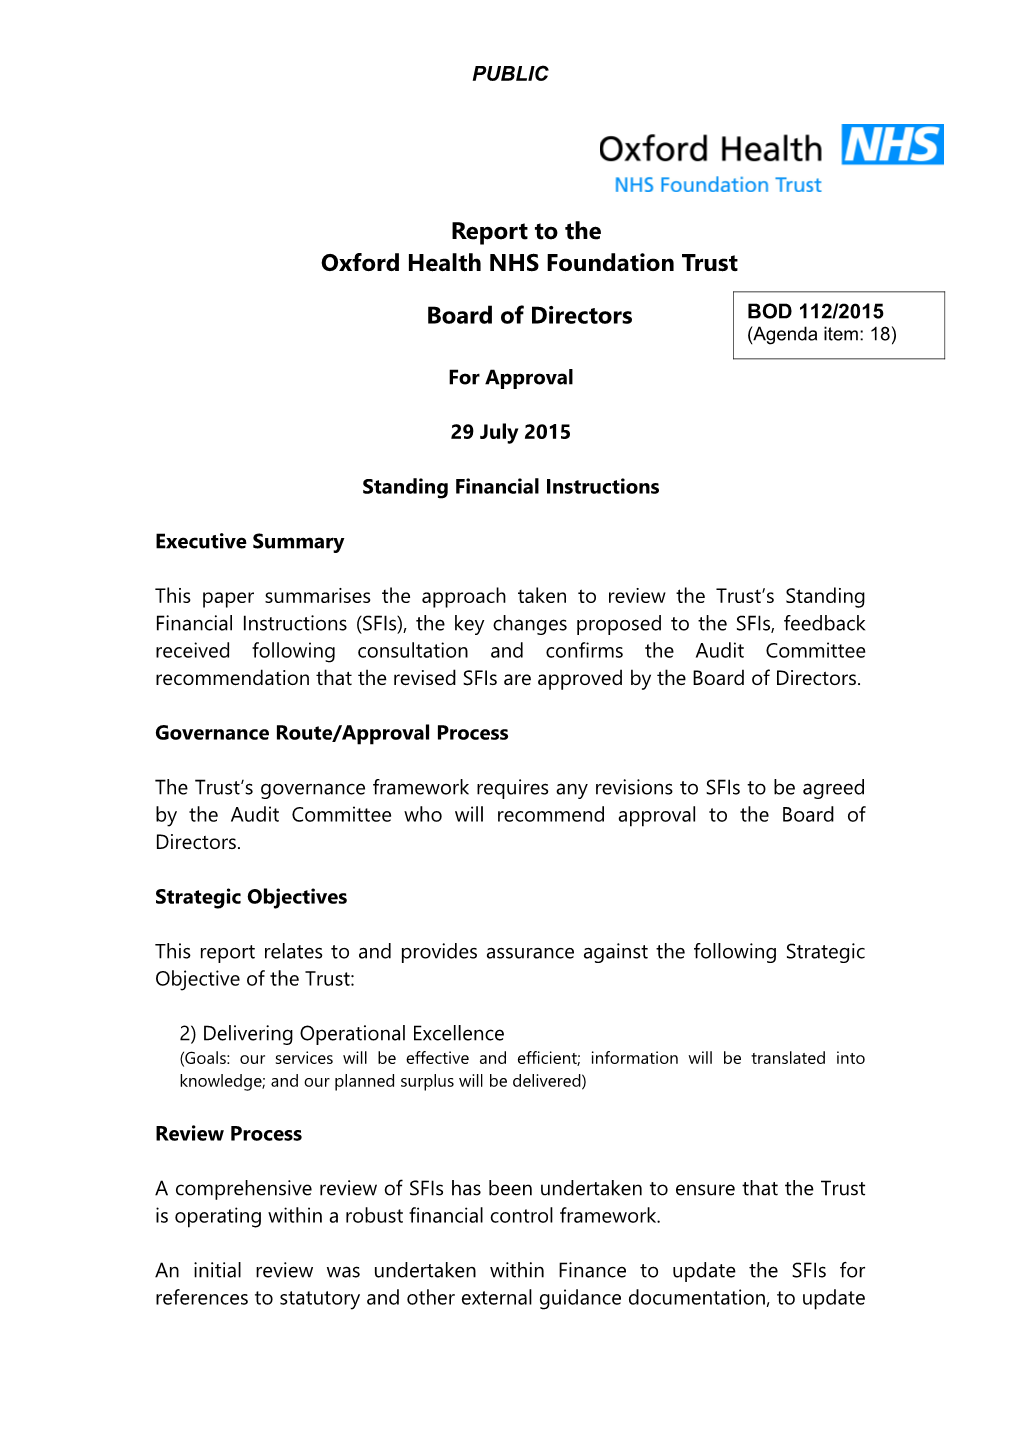 Report to the Oxford Health NHS Foundation Trust